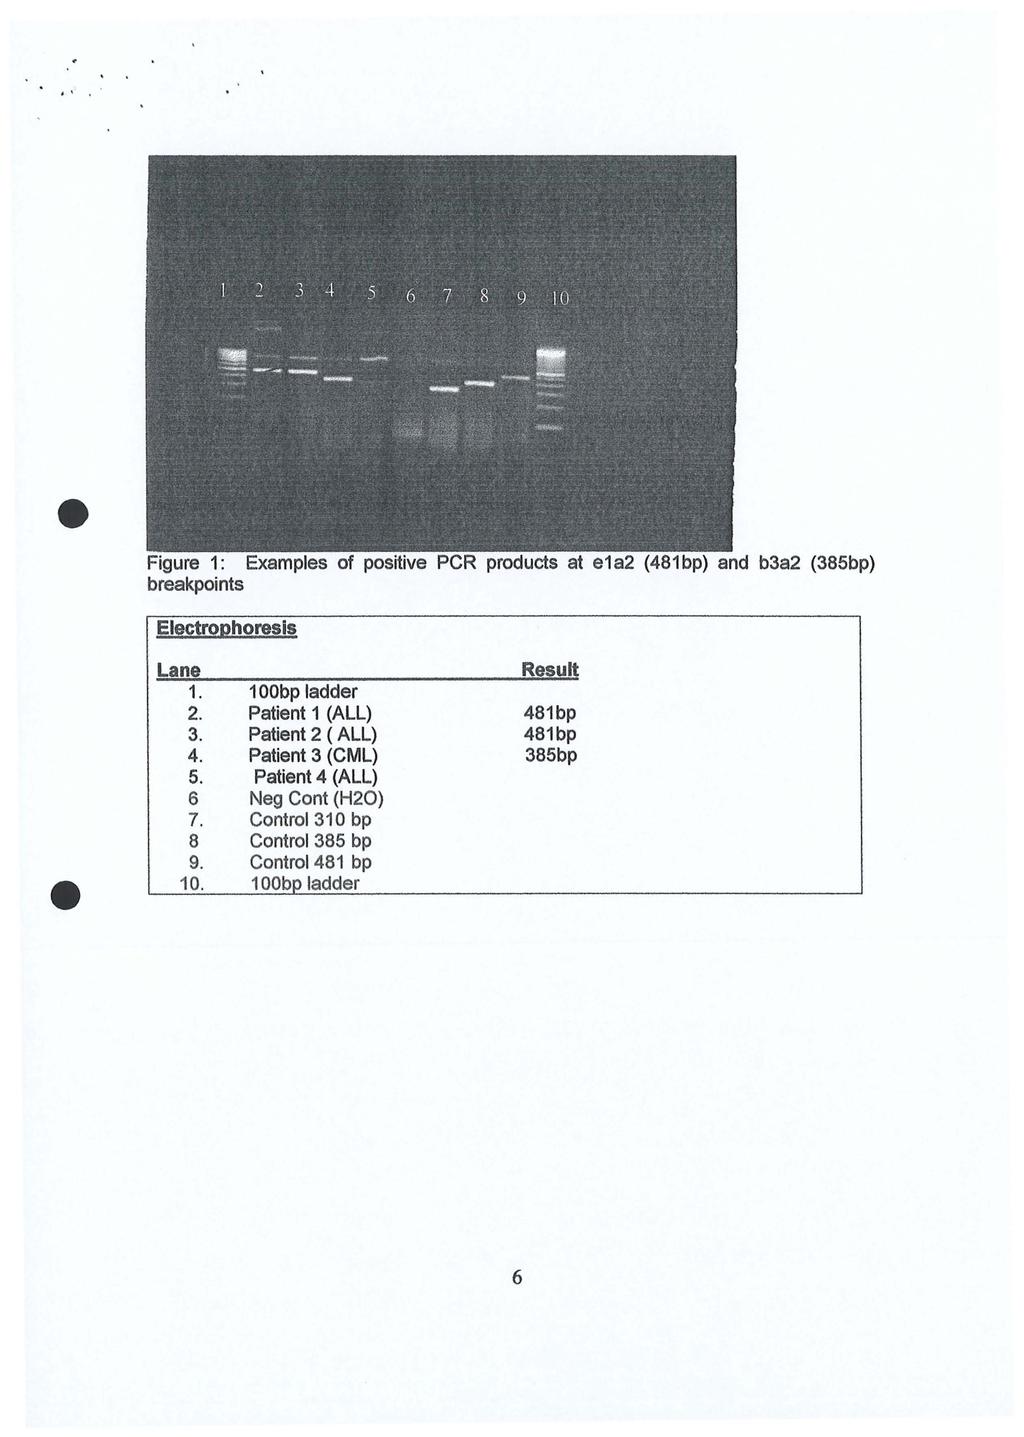 Figure 1: Examples of positive PCR products at e1a2 (481bp) and b3a2 (385bp) breakpoints Electrophoresis Lane 1. 2. 3. 4. 5. 6 7. 8 9. 10.